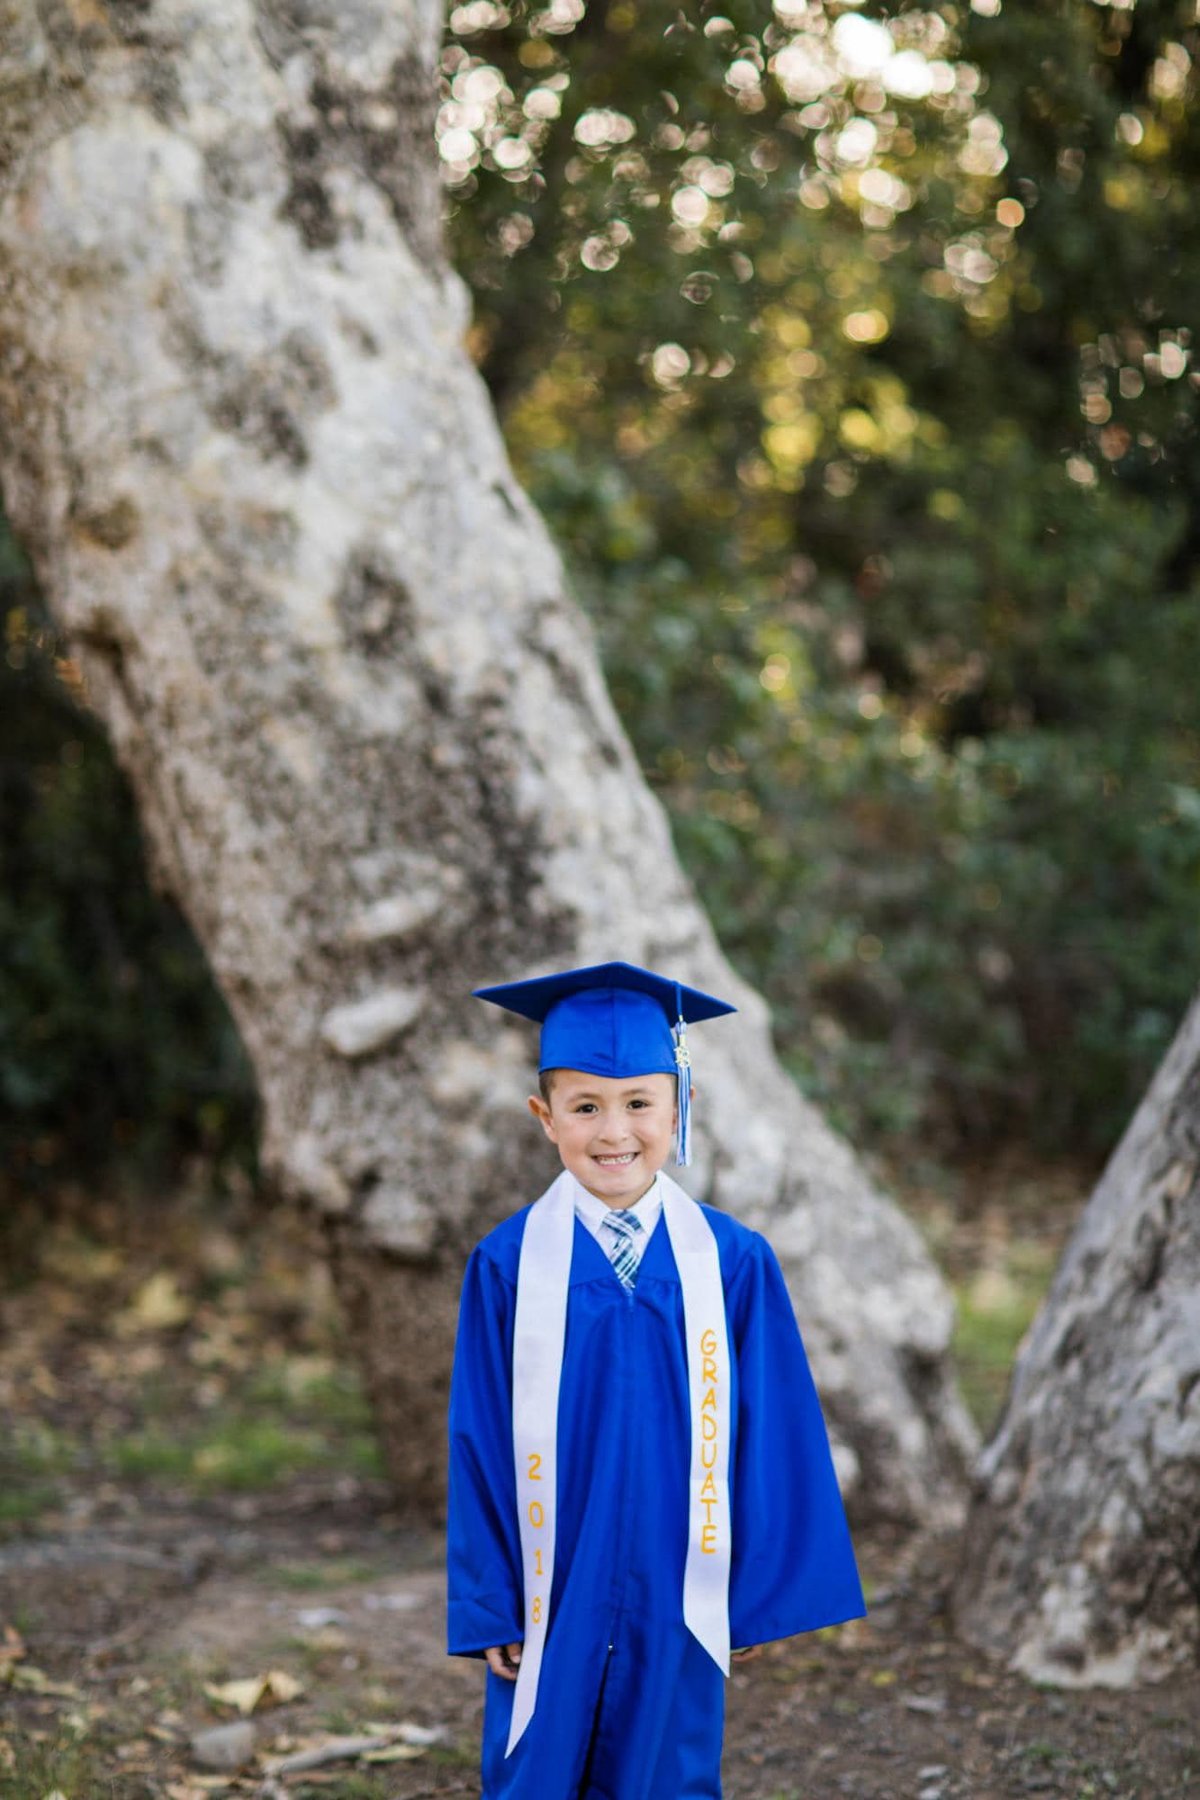 Young boy wears his cap and gown for his promotion day photo session